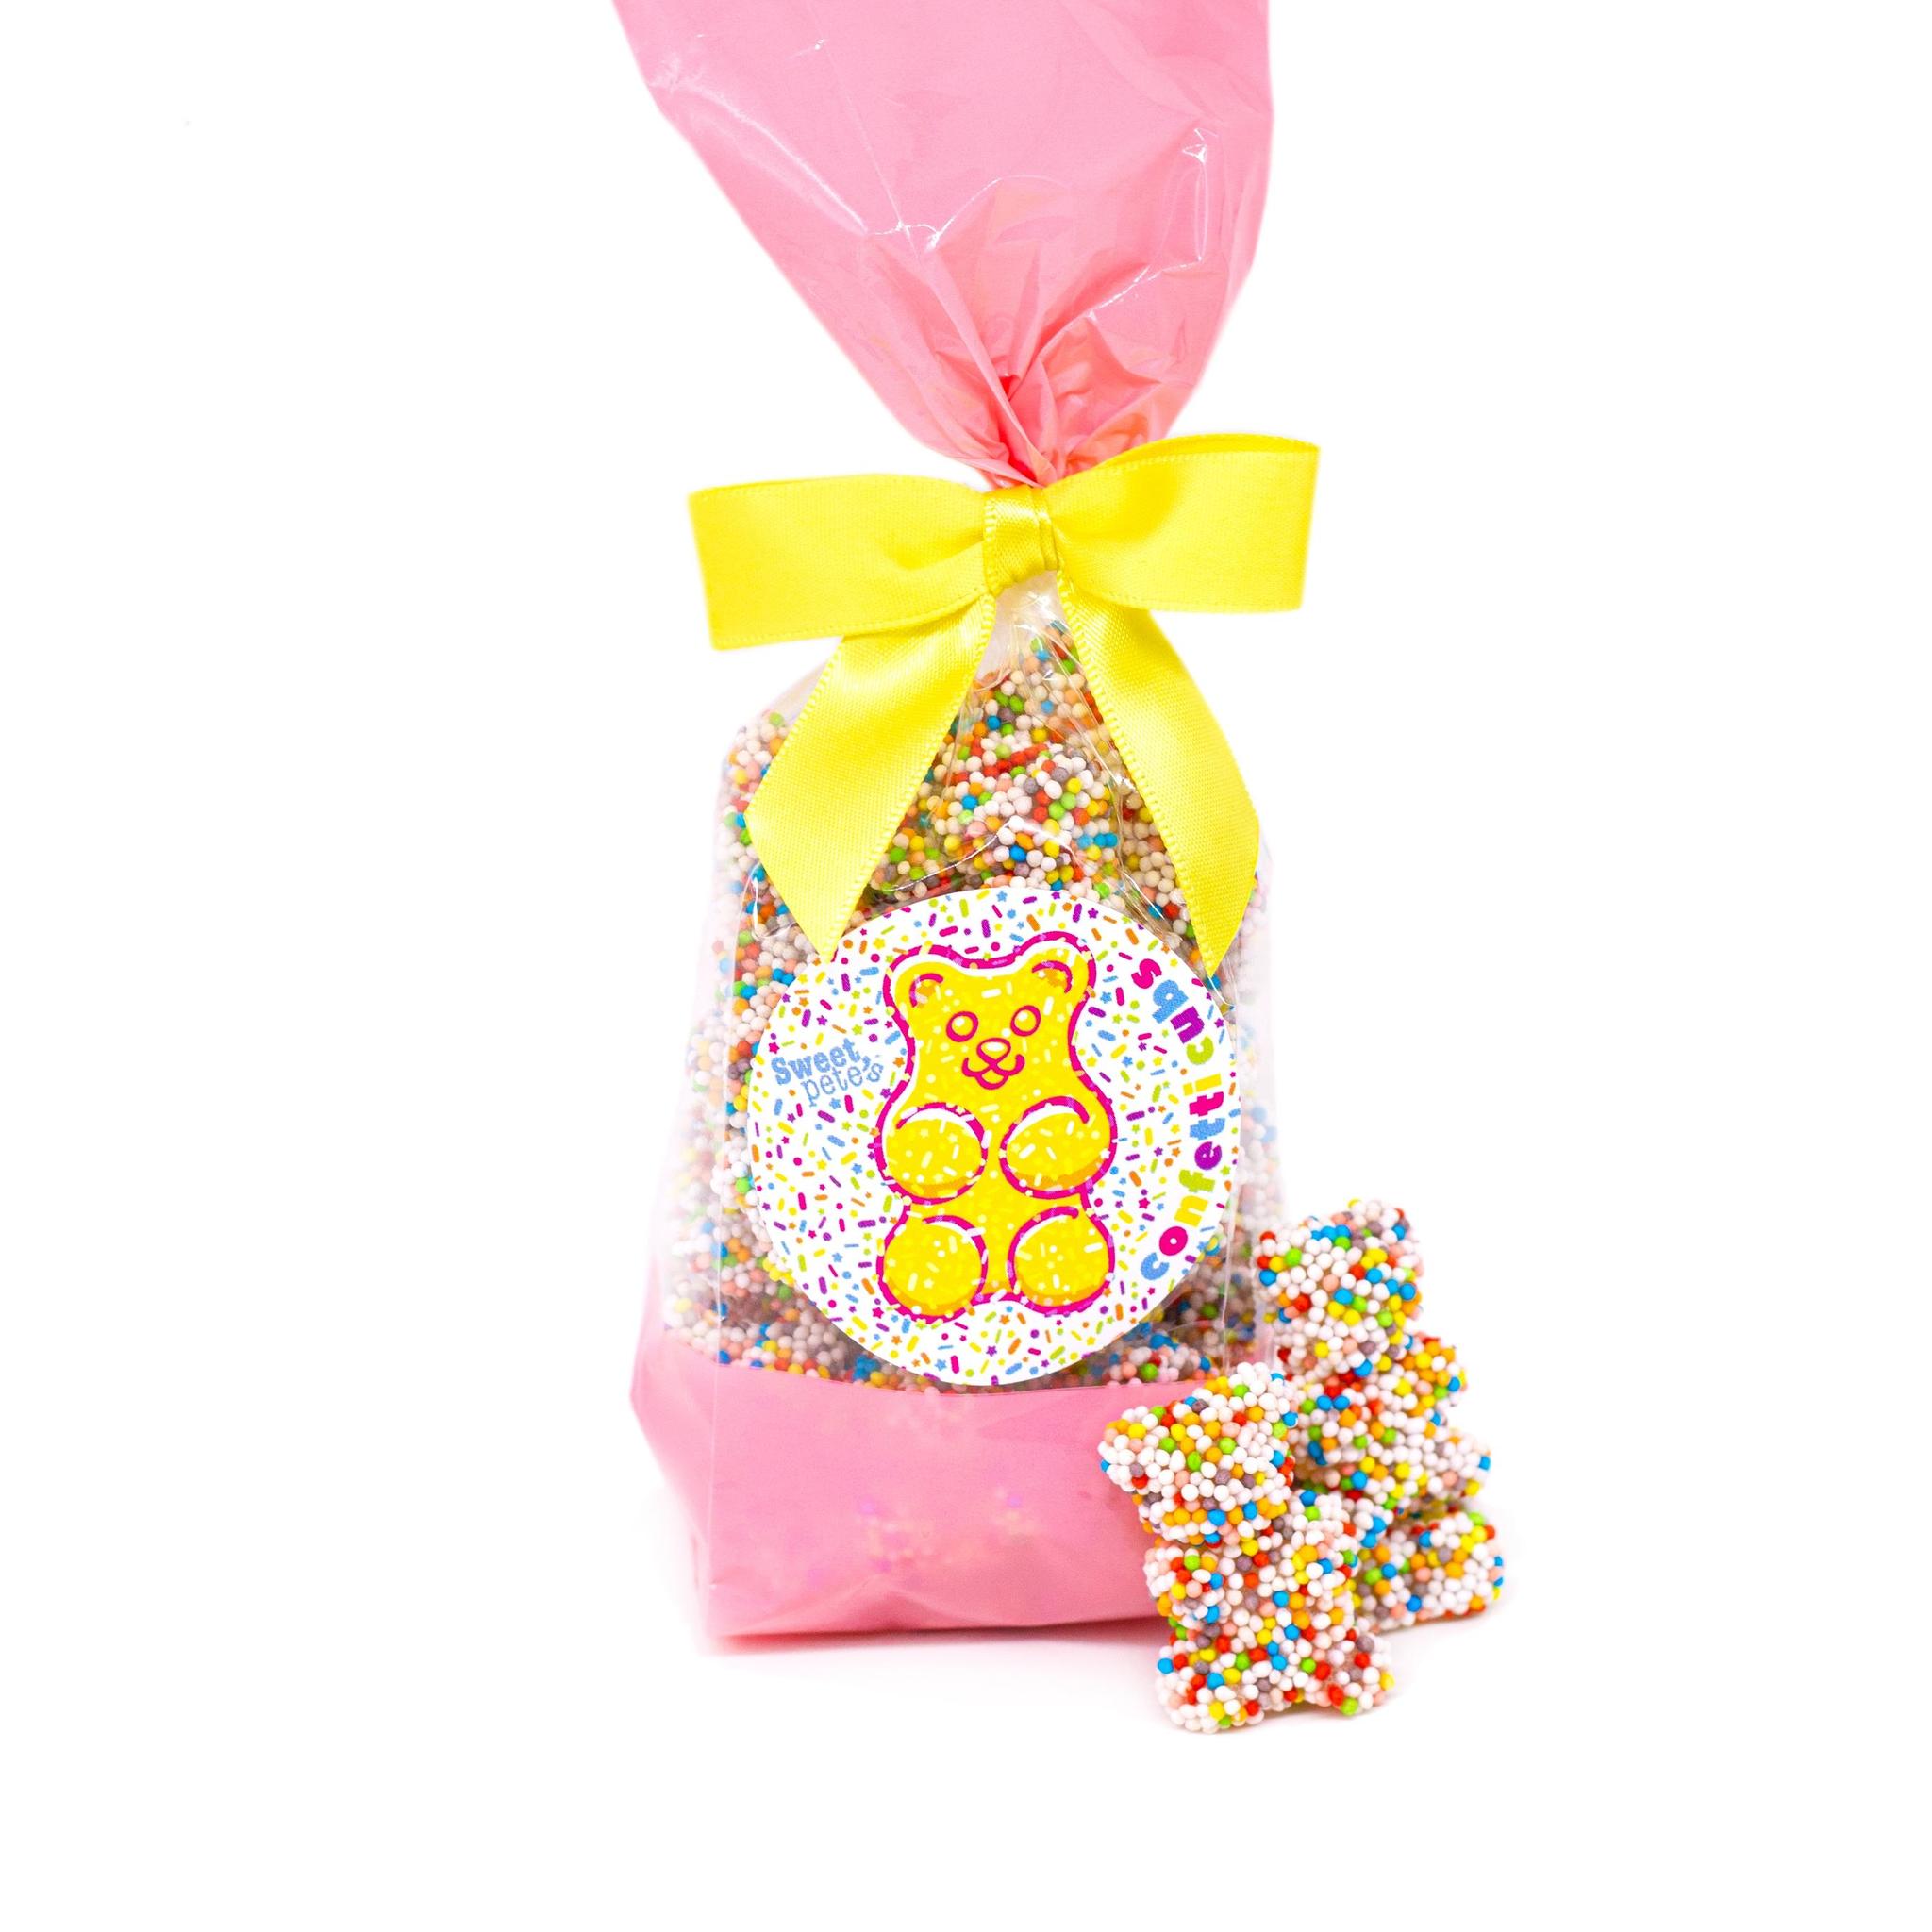 Small Pink Gift Bag Value Pack by Celebrate It